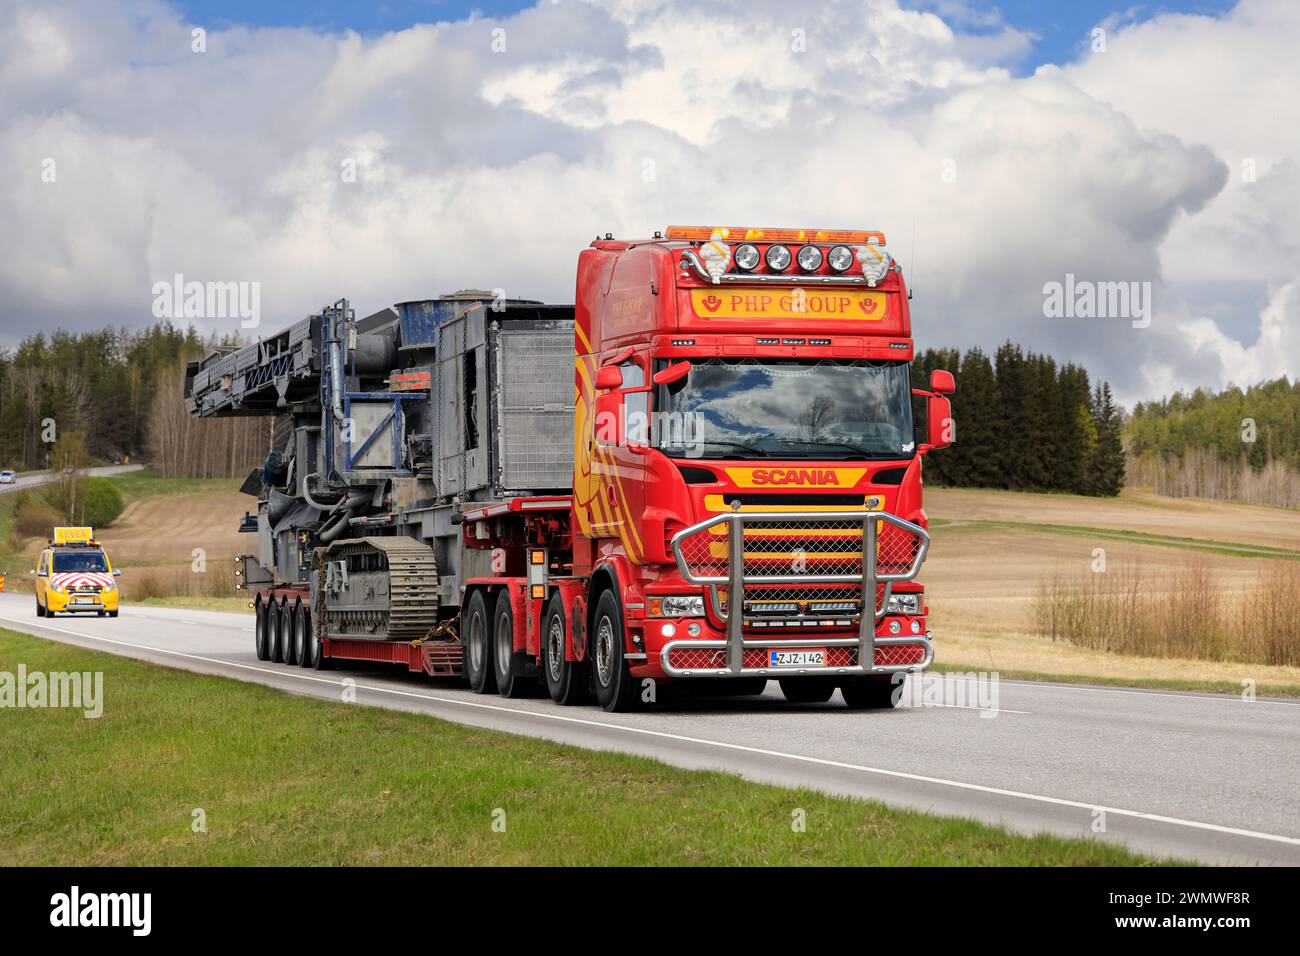 Scania truck PHP Group Oy hauls Volvo Penta powered crushing equipment as oversize load, assisted by escort vehicle. Salo, Finland. May 13, 2022. Stock Photo